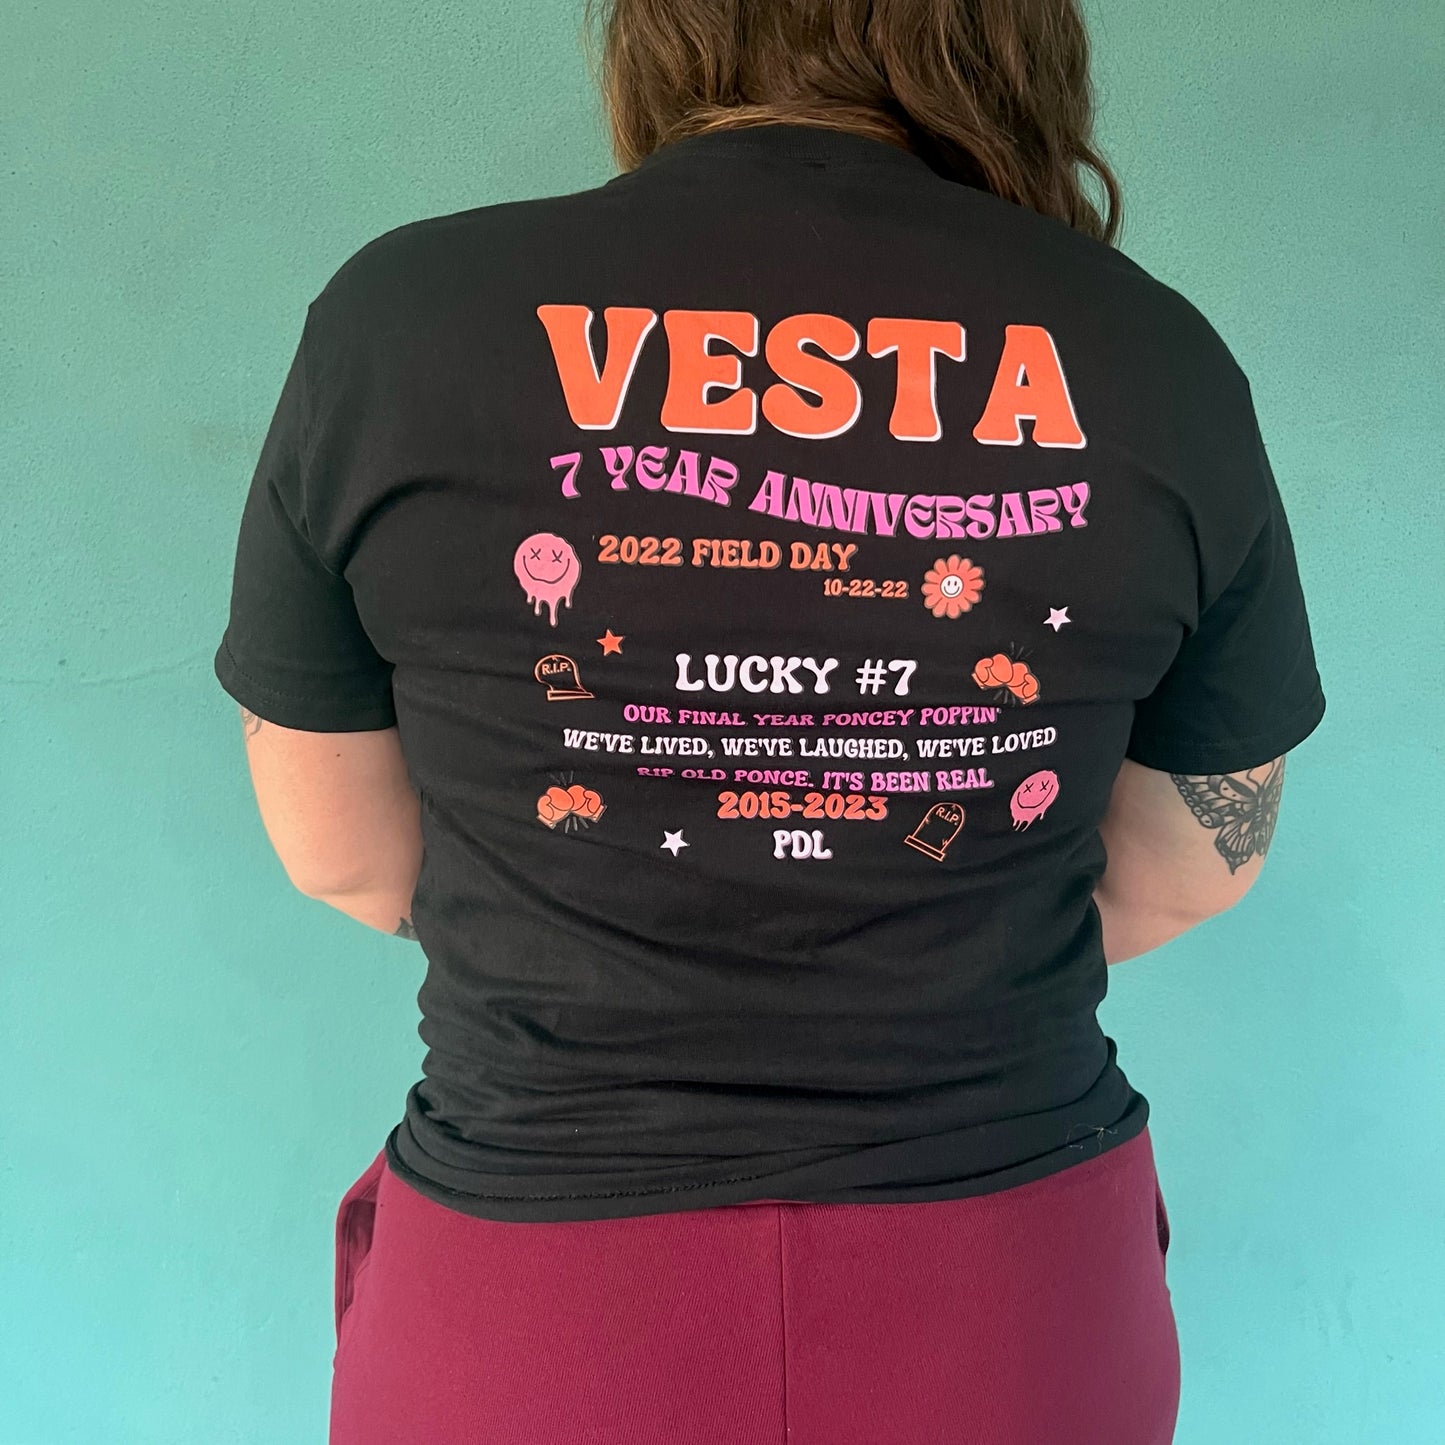 VESTA 7 Year Anniversary Tee - SOLD OUT!